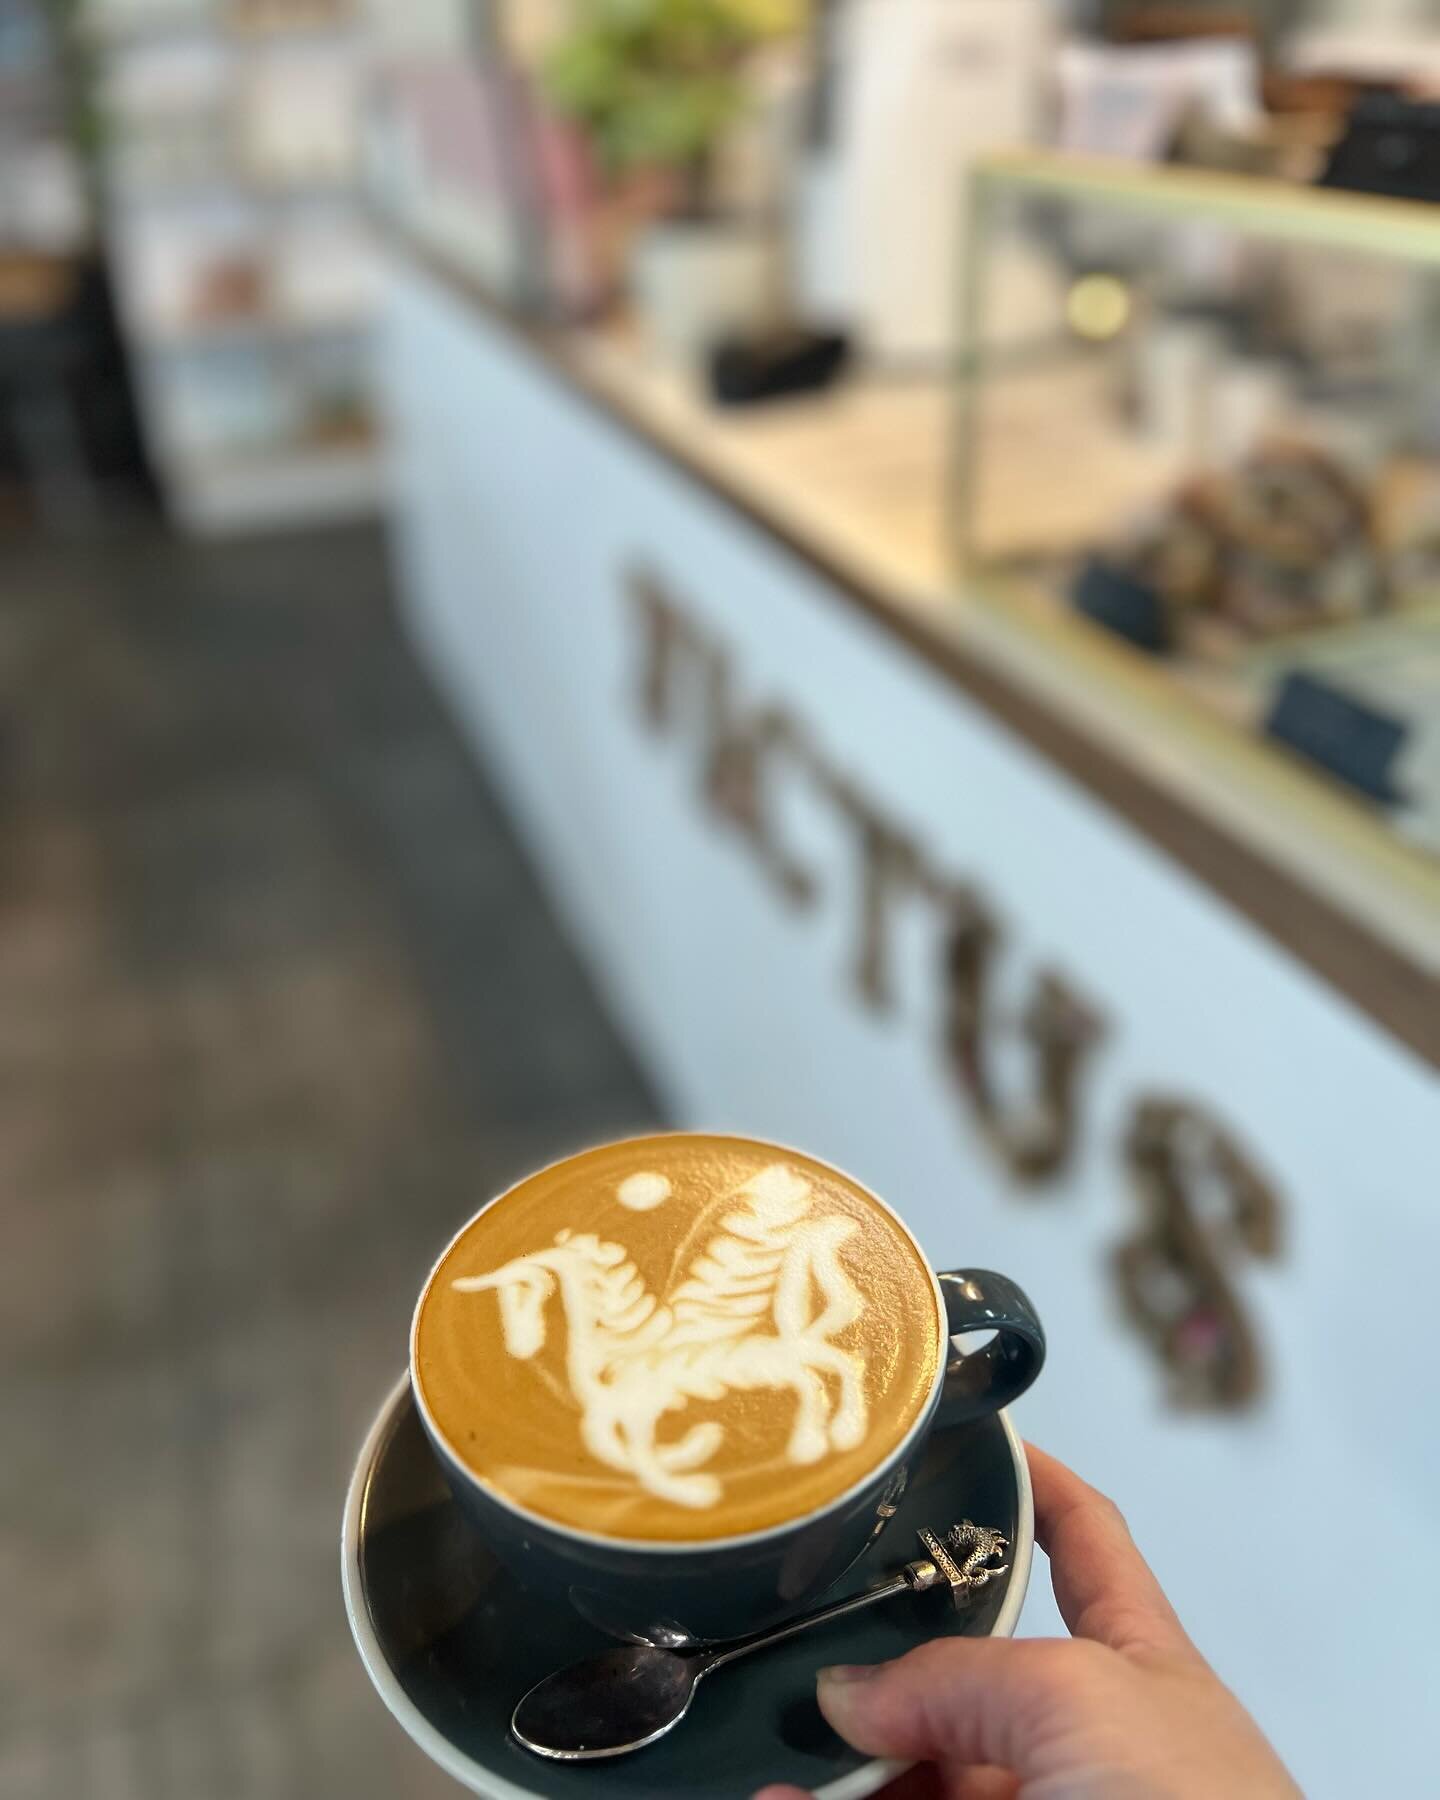 The place to be for your morning coffee! Come say hey 👋🏼 
Brews are pouring, the team have smiles on their faces and the cabinet is stocked with some delicious treats! 💫 ☕️ 
.
#victus #victusnz #cafe #nelson #nelsontasman #barista #coffee #special